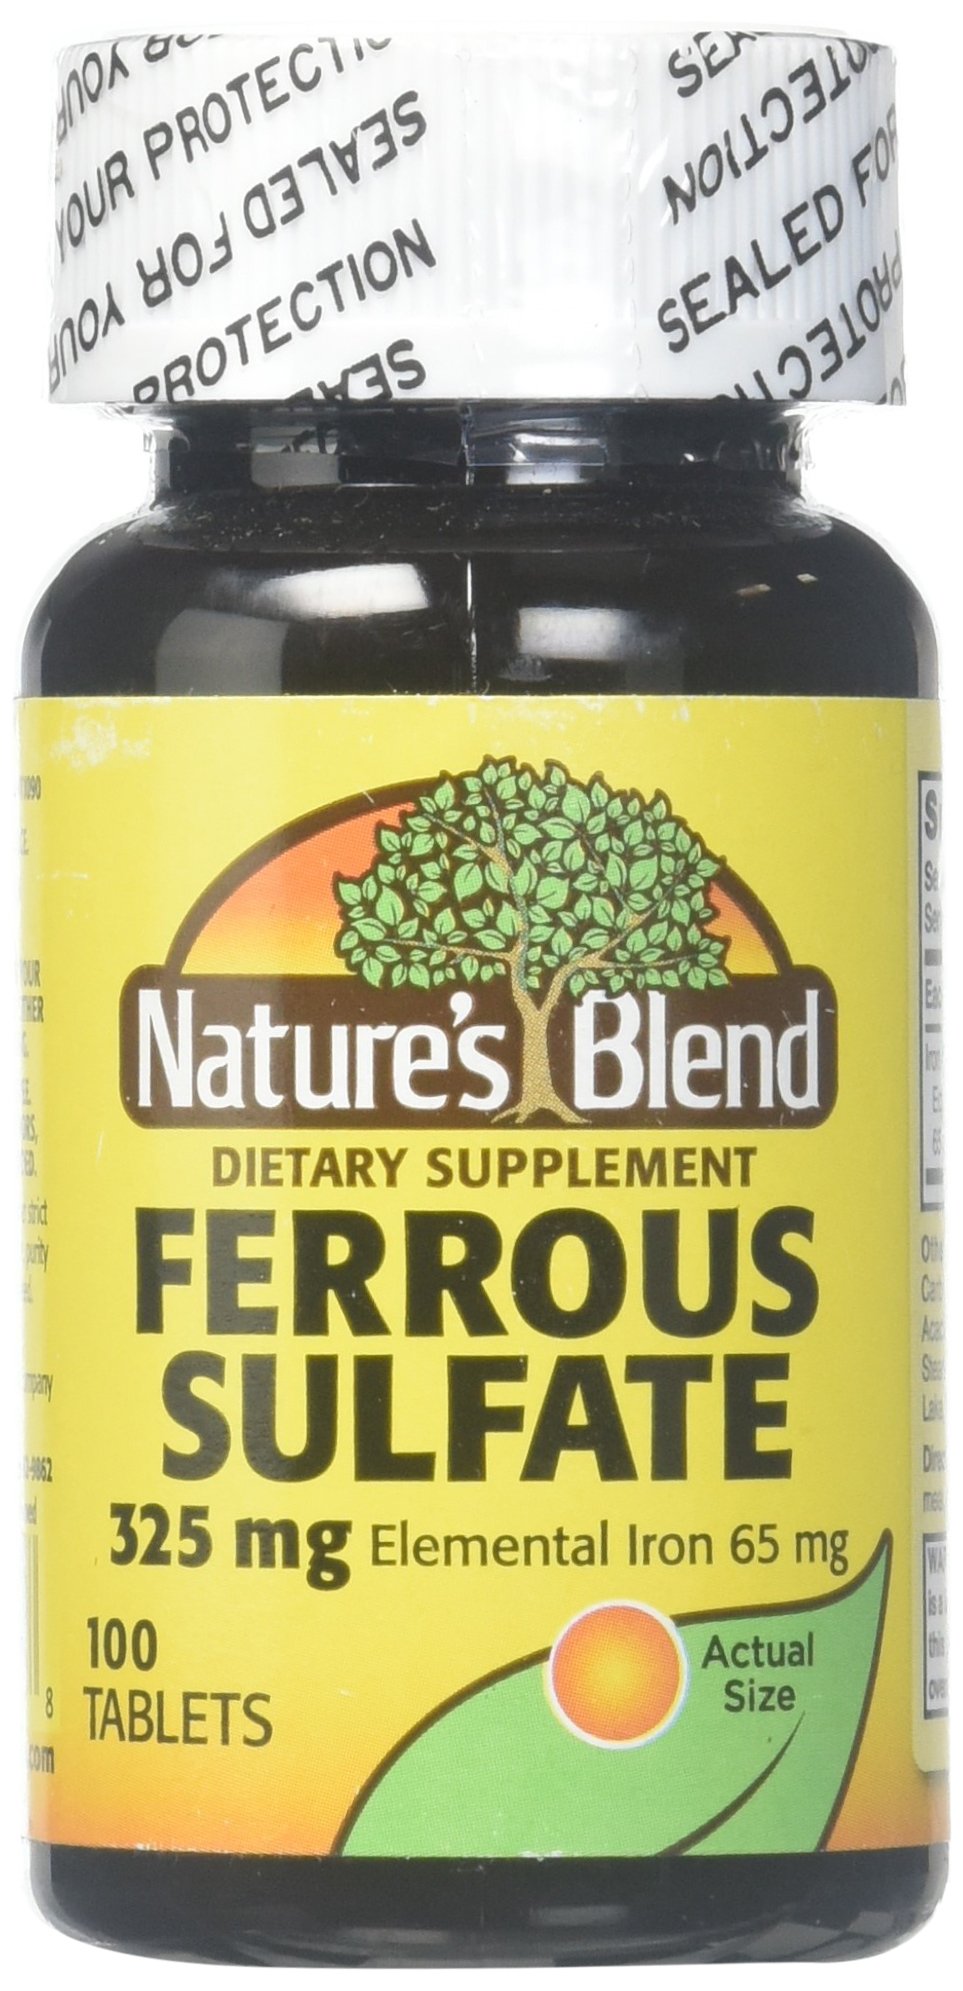 Nature's Blend Ferrous Sulfate 325mg BPK, Assorted, 100 Count